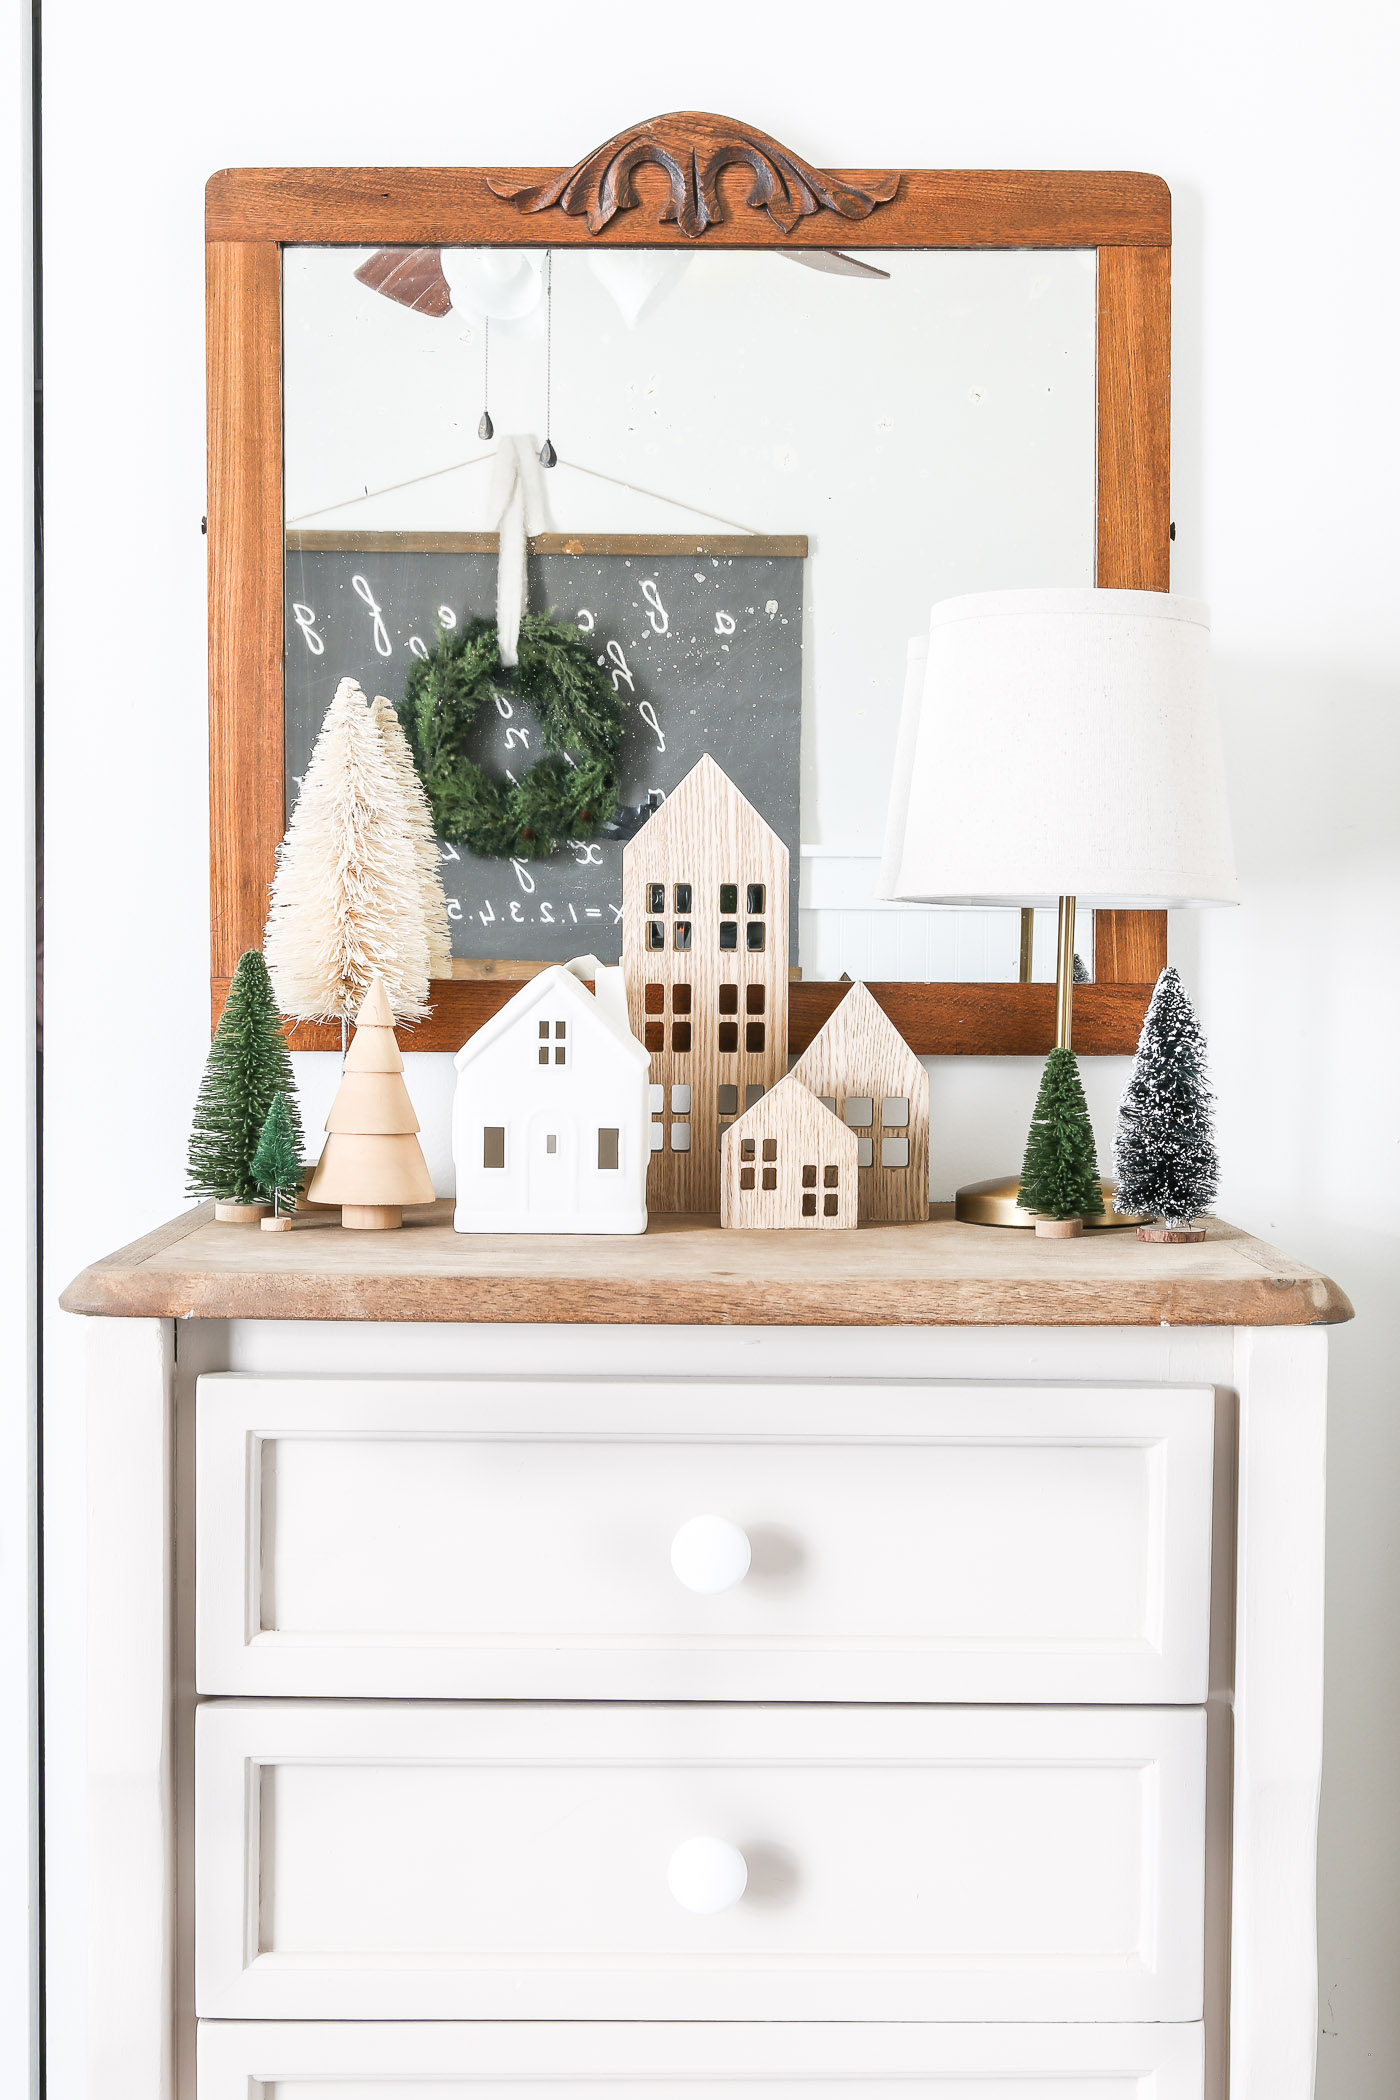 Neutral and Natural Christmas Nursery